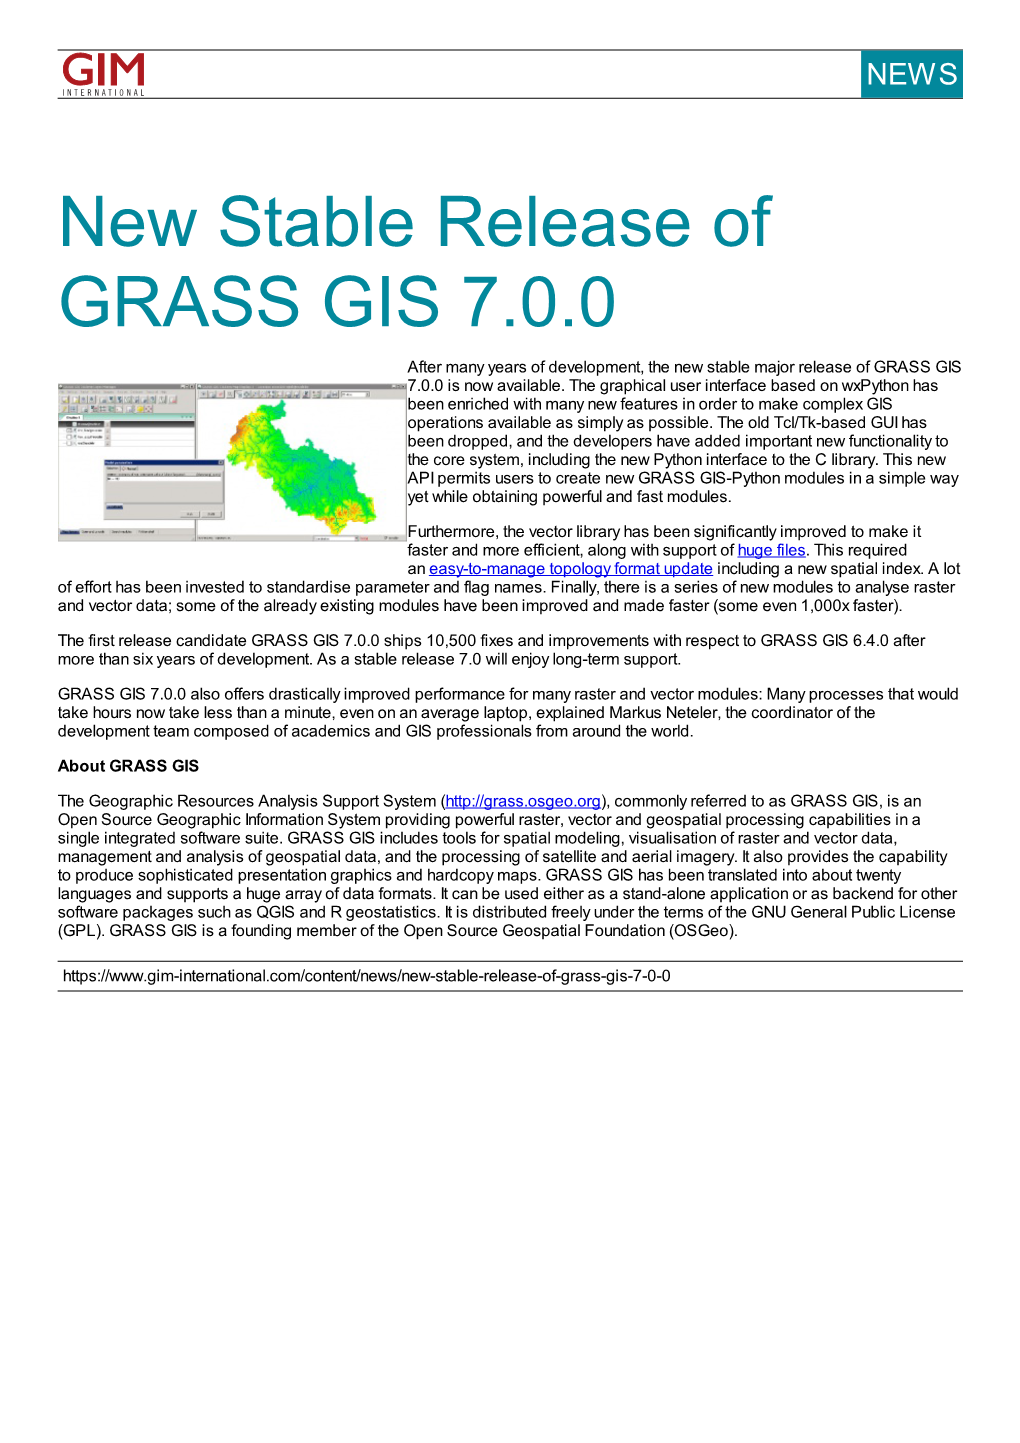 New Stable Release of GRASS GIS 7.0.0